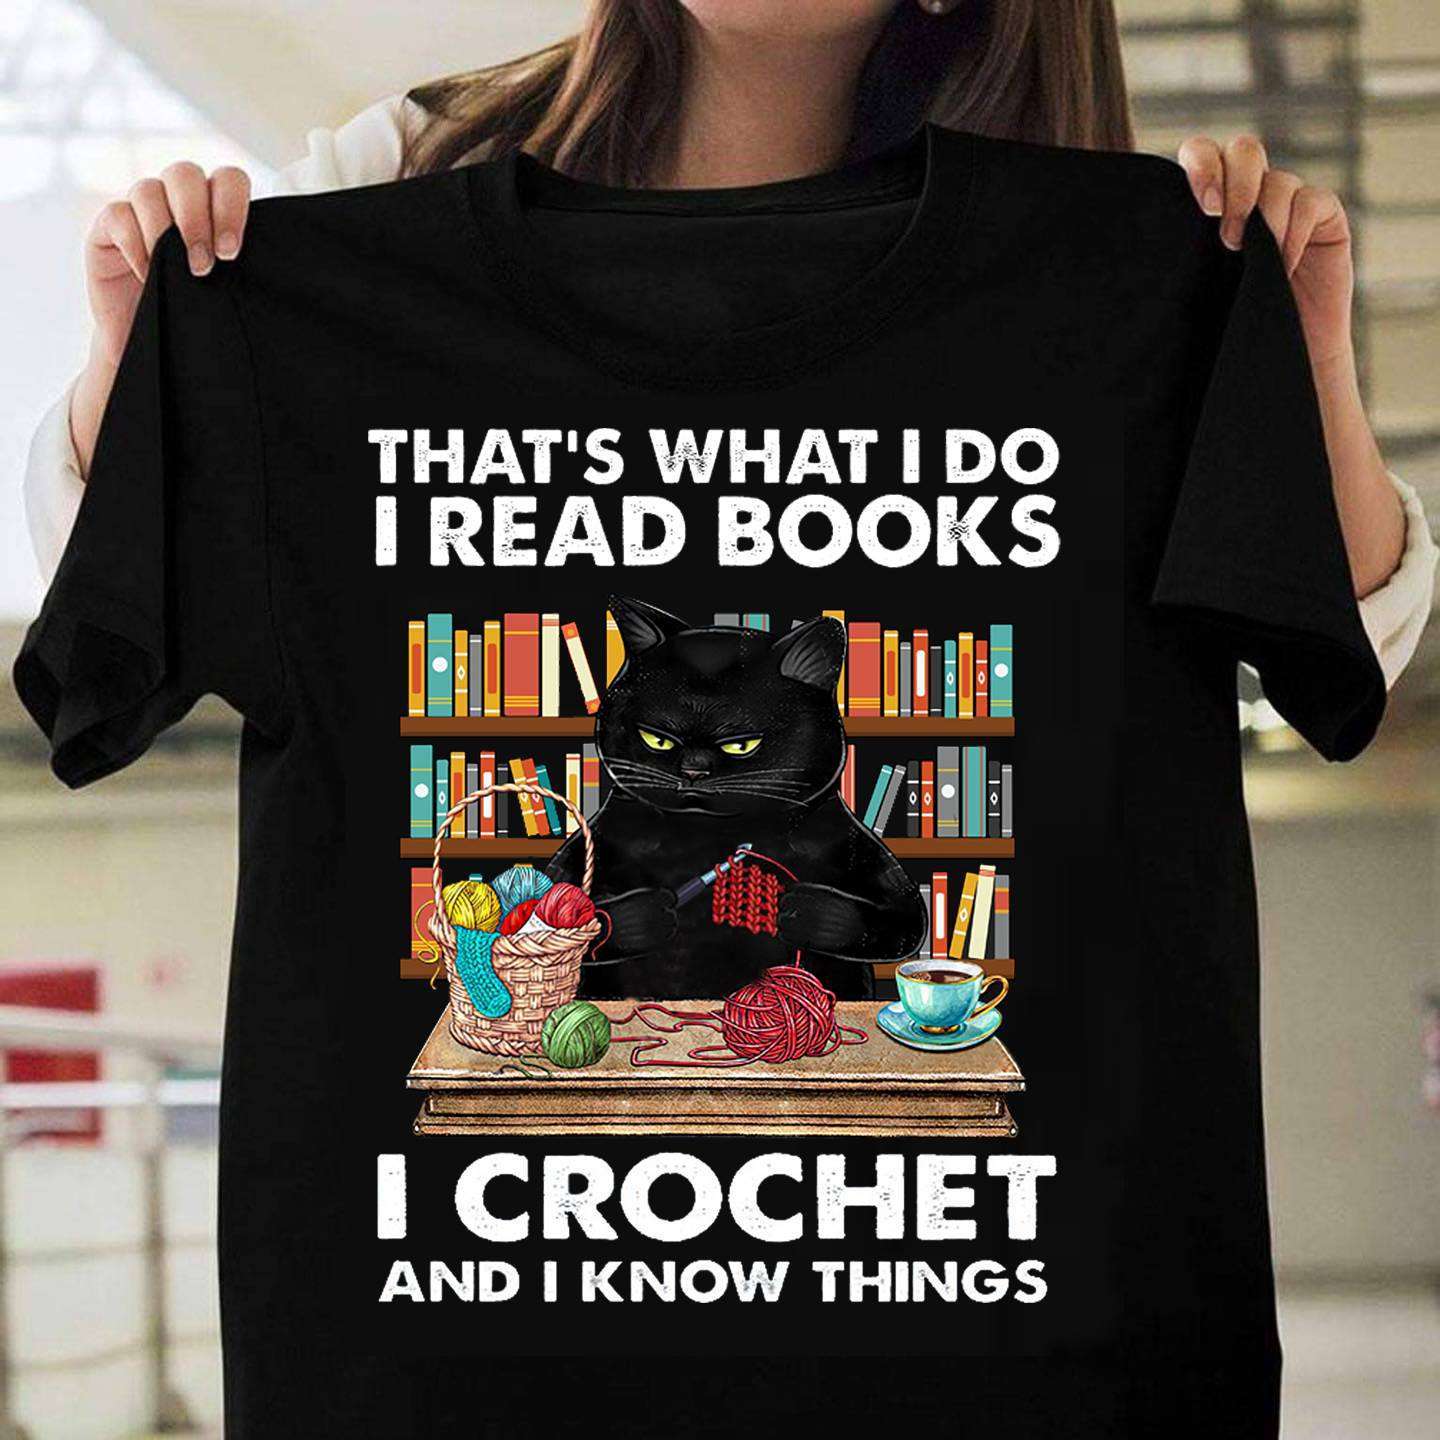 Crochet Black Cat Love Book - That's what i do i read books i crochet and i know things